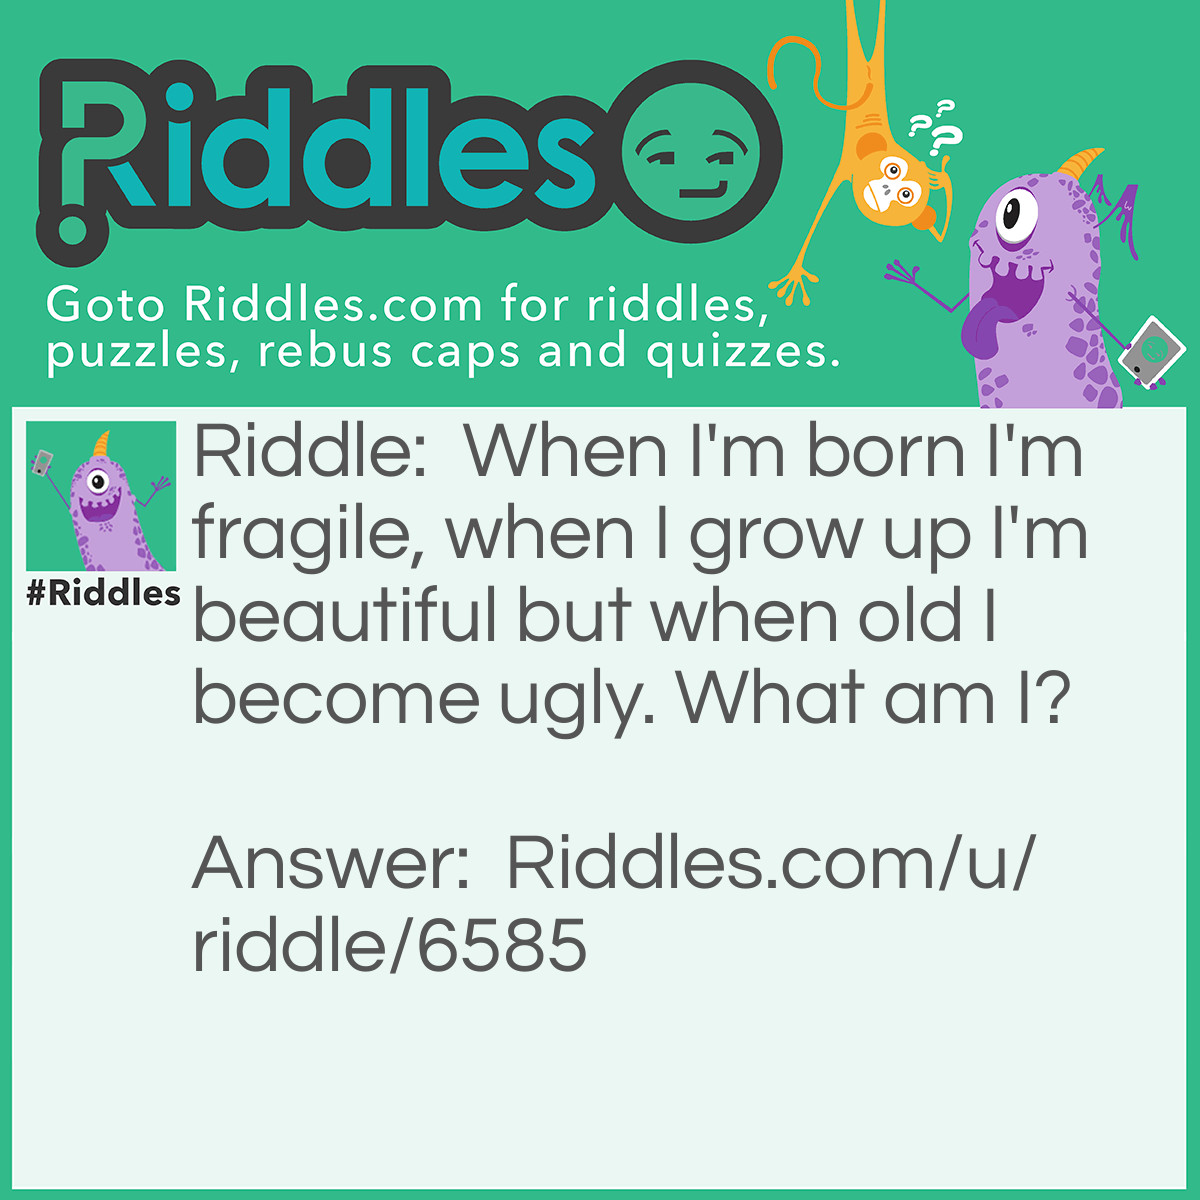 Riddle: When I'm born I'm fragile, when I grow up I'm beautiful but when old I become ugly. What am I? Answer: A rose!